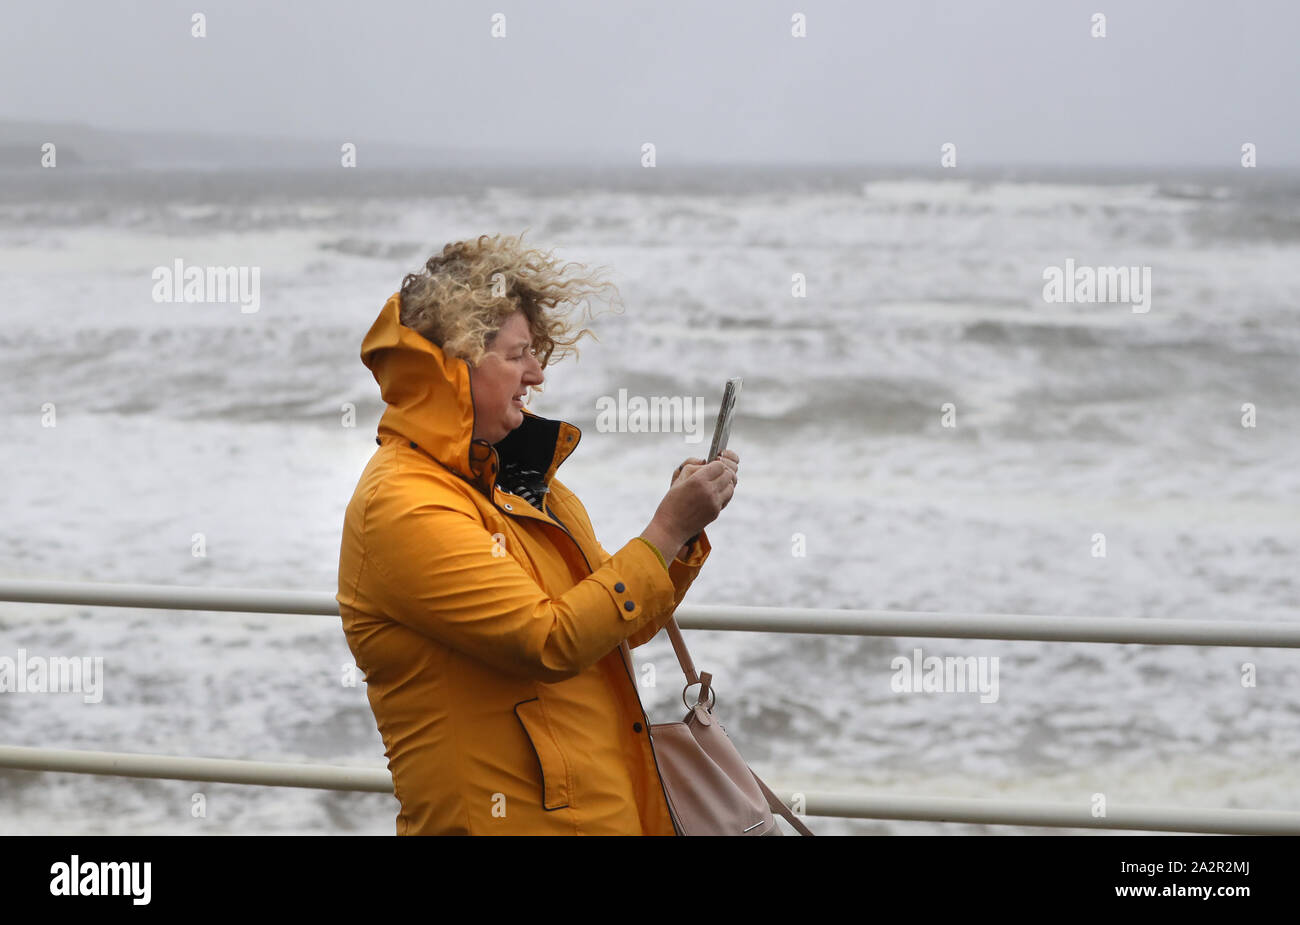 A woman walks along the sea front in Lahinch, County Clare, on the West Coast of Ireland as storm Lorenzo makes landfall, with a status orange wind warning and a yellow rain warning having been issued. Stock Photo